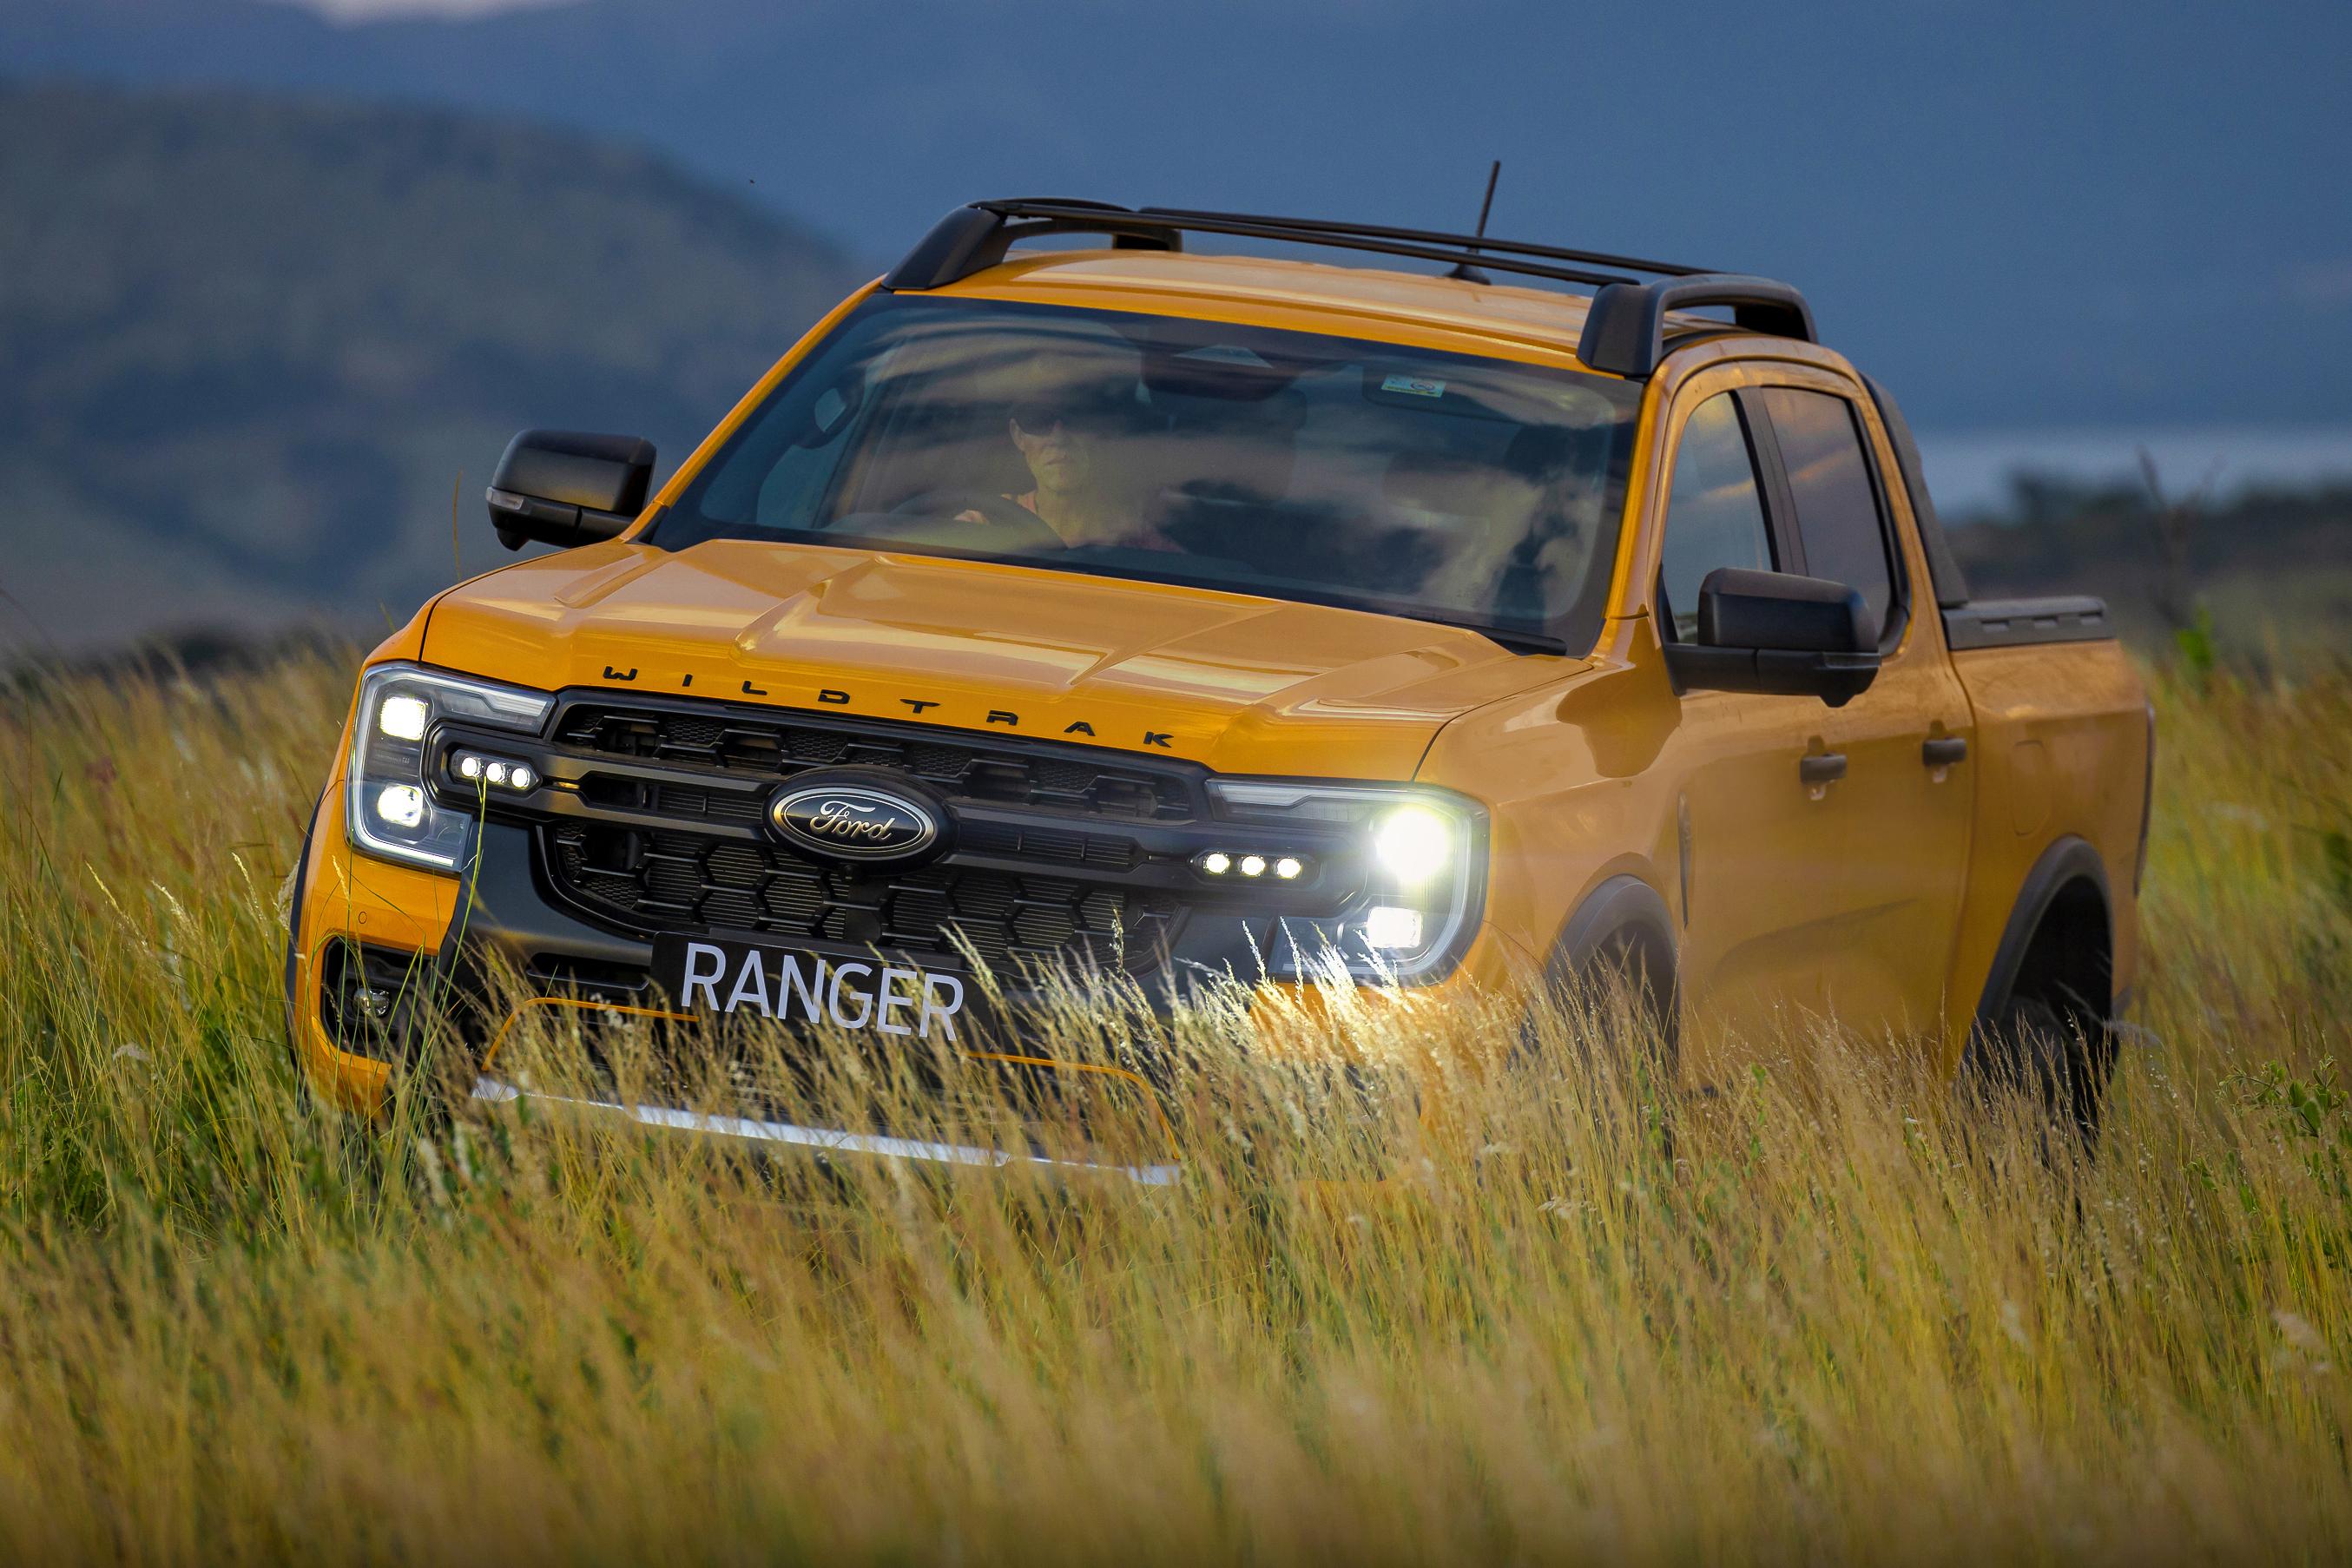 Ford drops new Ranger variant with wider track, lifted Bilstein shocks